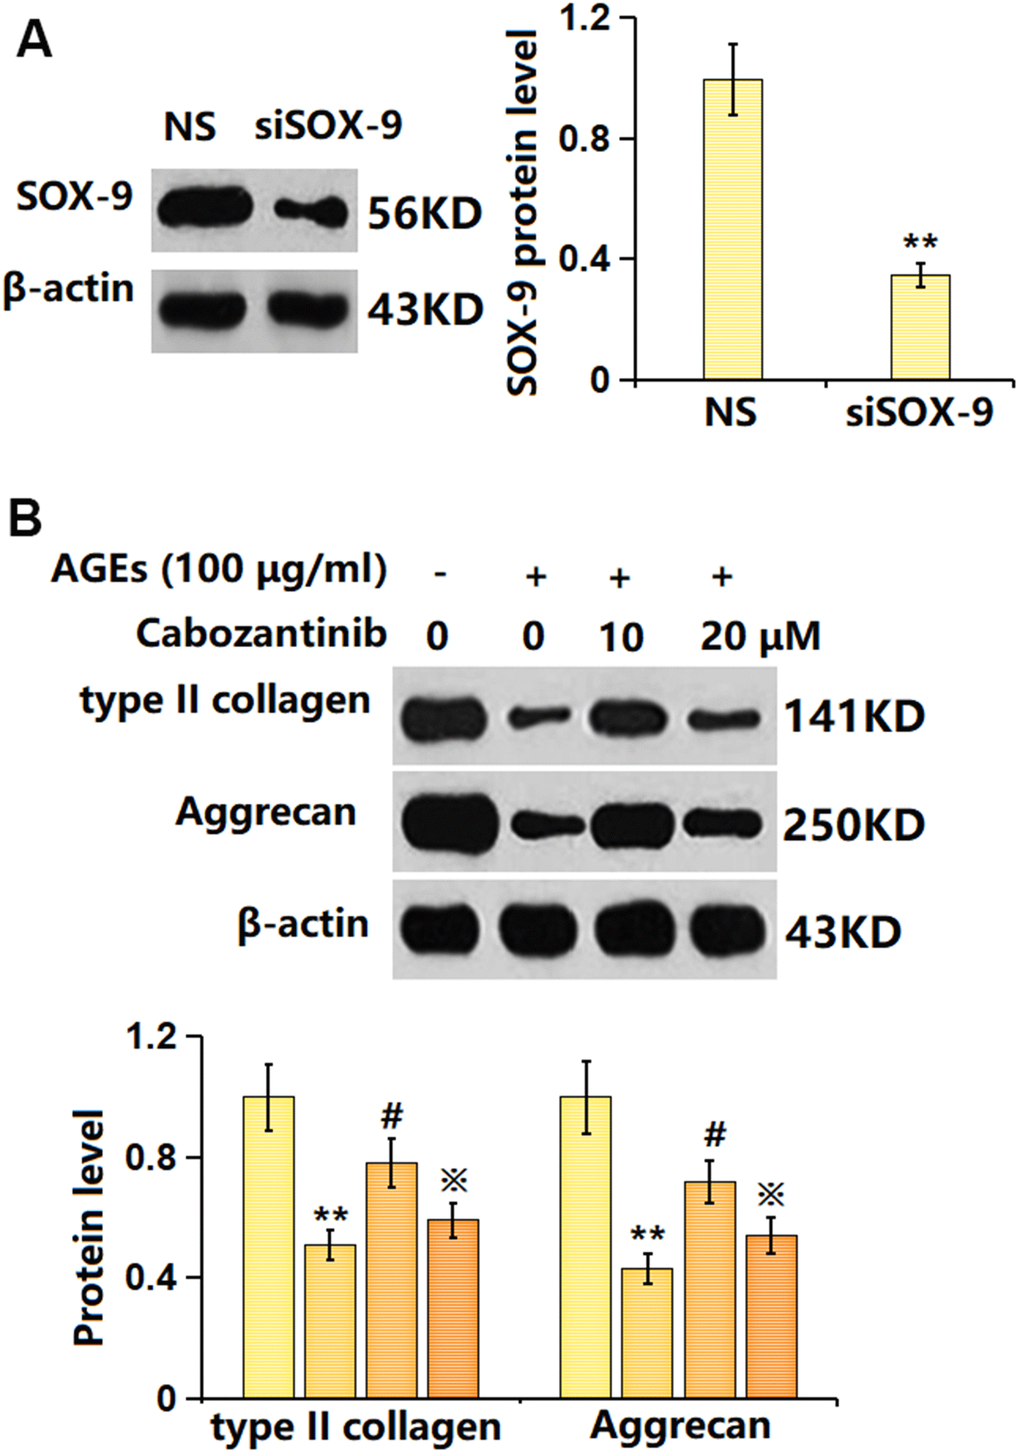 Silencing SOX-9 abolished the effect of Cabozantinib on type II collagen and aggrecan levels in AGEs-treated SW1353 chondrocytes. Cells were transfected with the siRNA targeting SOX-9 (siR-SOX-9), followed by stimulated with 100 μg/ml AGEs in the presence or absence of 20 μM Cabozantinib for 24 h. (A) Successful knockdown of SOX-9. (B) The protein level of type II collagen and Aggrecan was determined by the ELISA assay (n=6, *, ** PPP